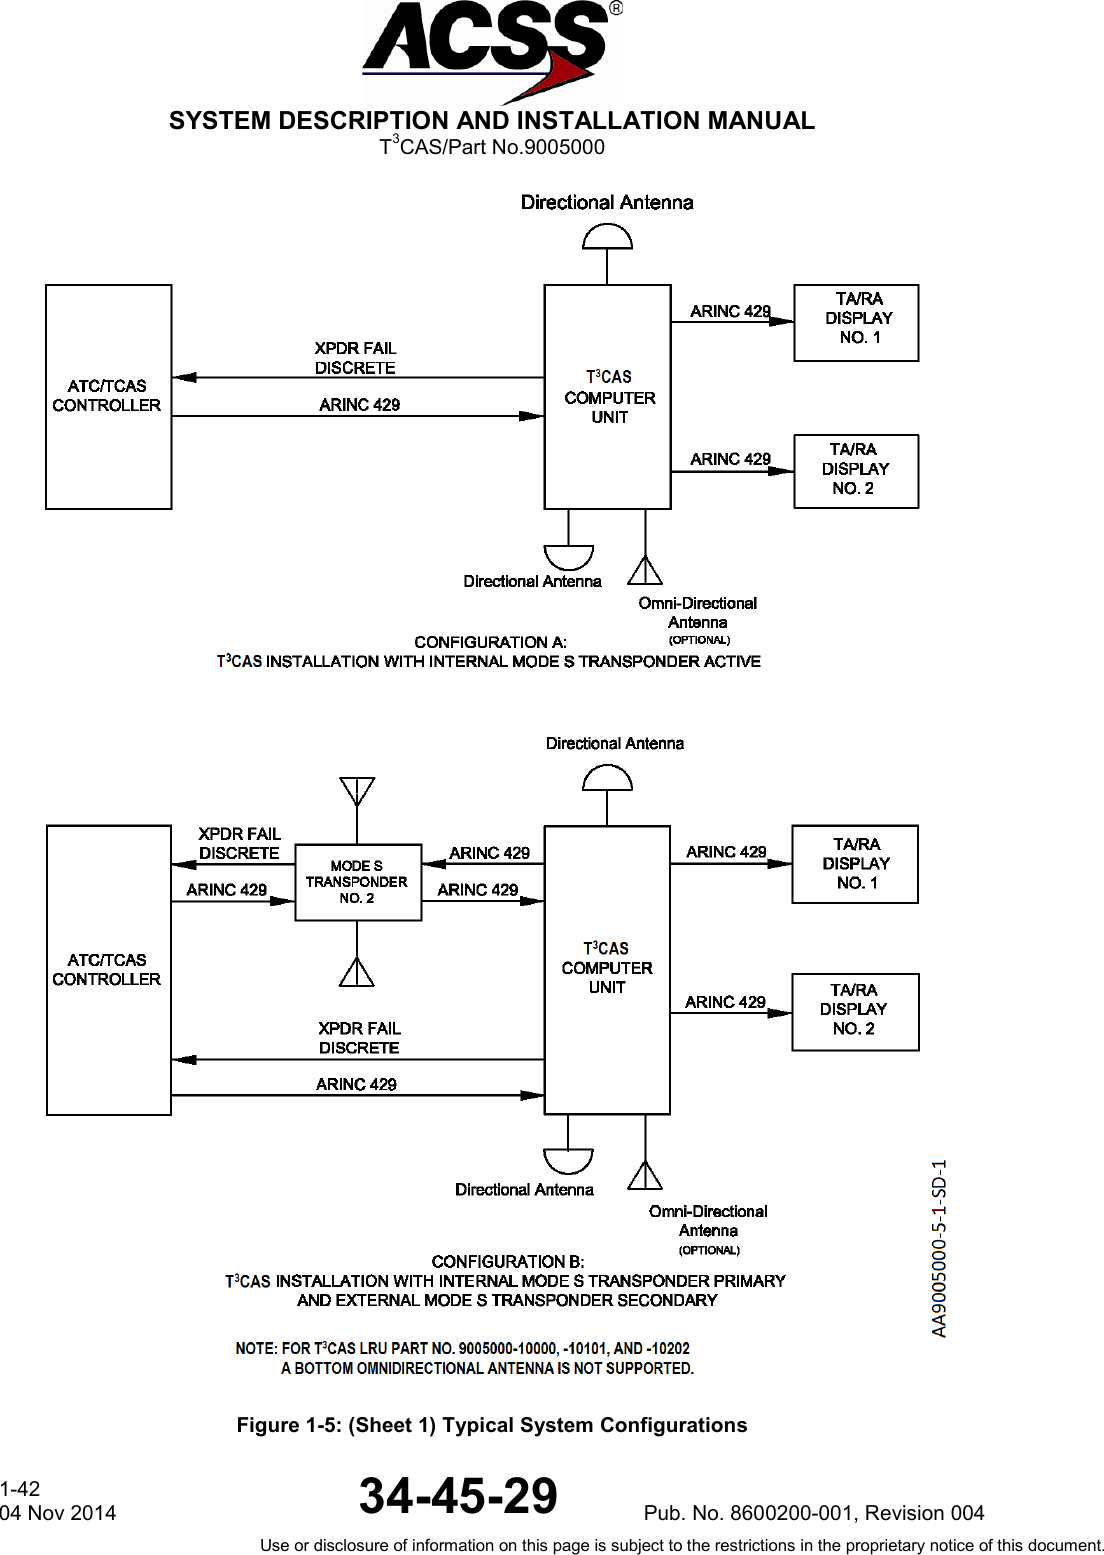  SYSTEM DESCRIPTION AND INSTALLATION MANUAL T3CAS/Part No.9005000  Figure 1-5: (Sheet 1) Typical System Configurations 1-42 04 Nov 2014 34-45-29 Pub. No. 8600200-001, Revision 004 Use or disclosure of information on this page is subject to the restrictions in the proprietary notice of this document.  